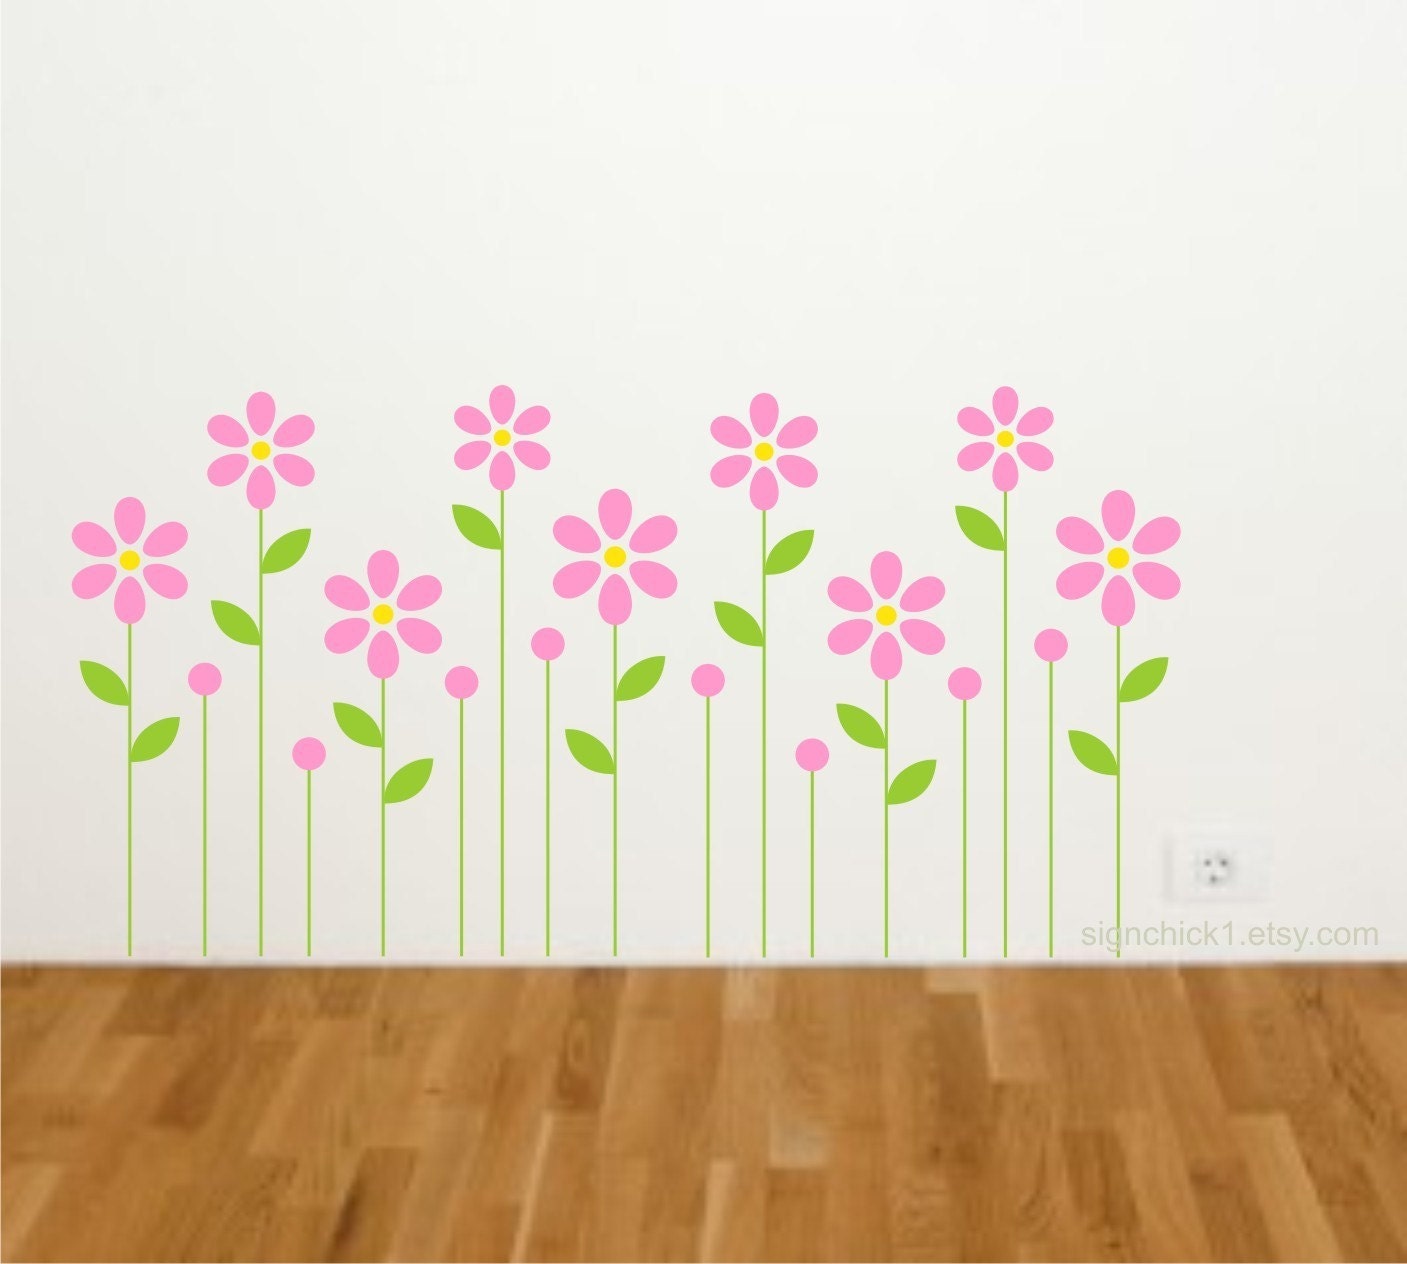 Field of Daisies wall decal Choose Colors